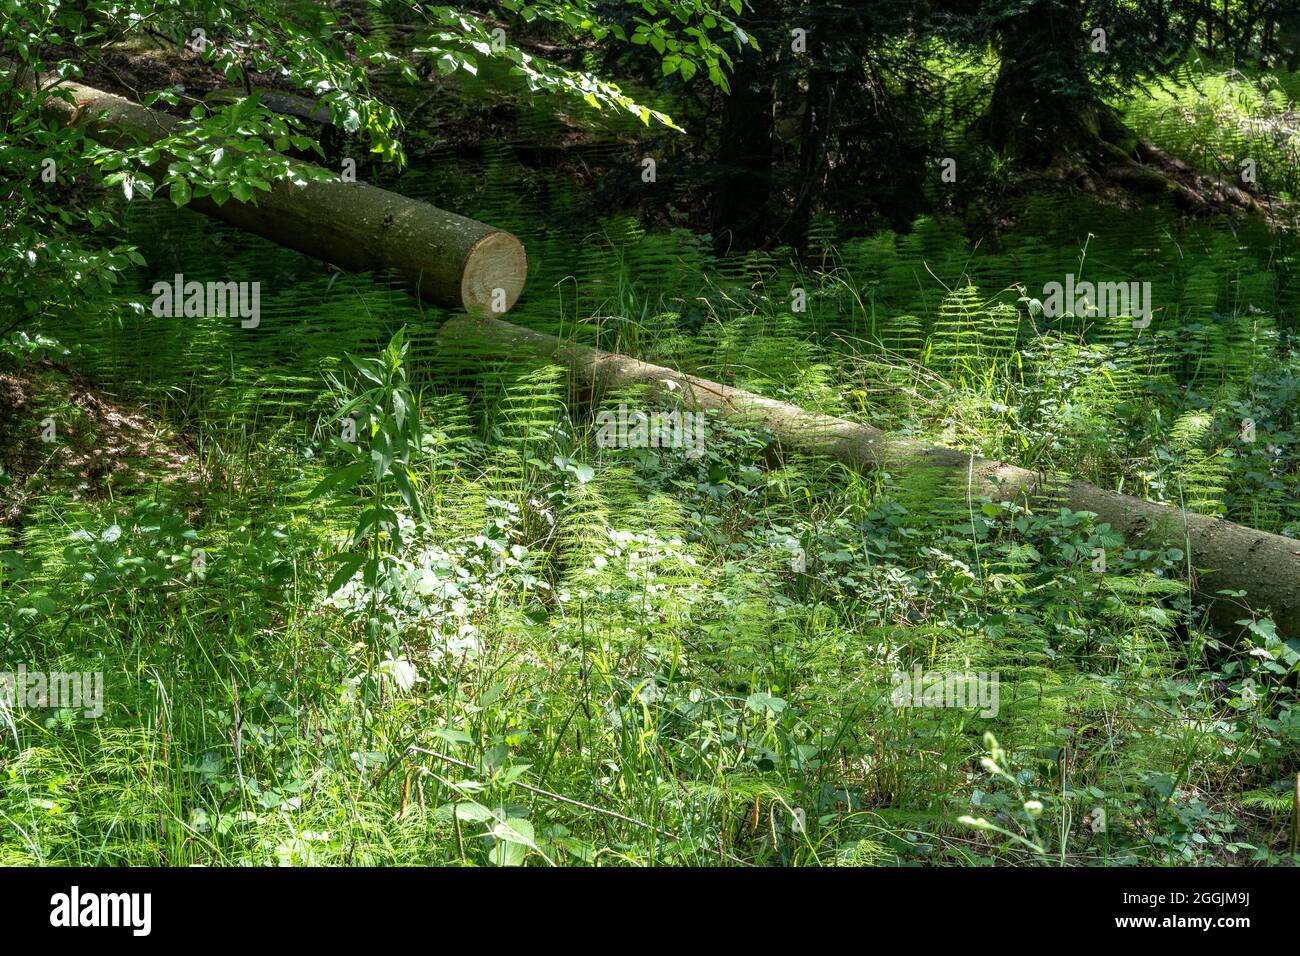 Europe, Germany, Baden-Wuerttemberg, Swabian-Franconian Forest Nature Park, Welzheim, picturesque forest scene Stock Photo